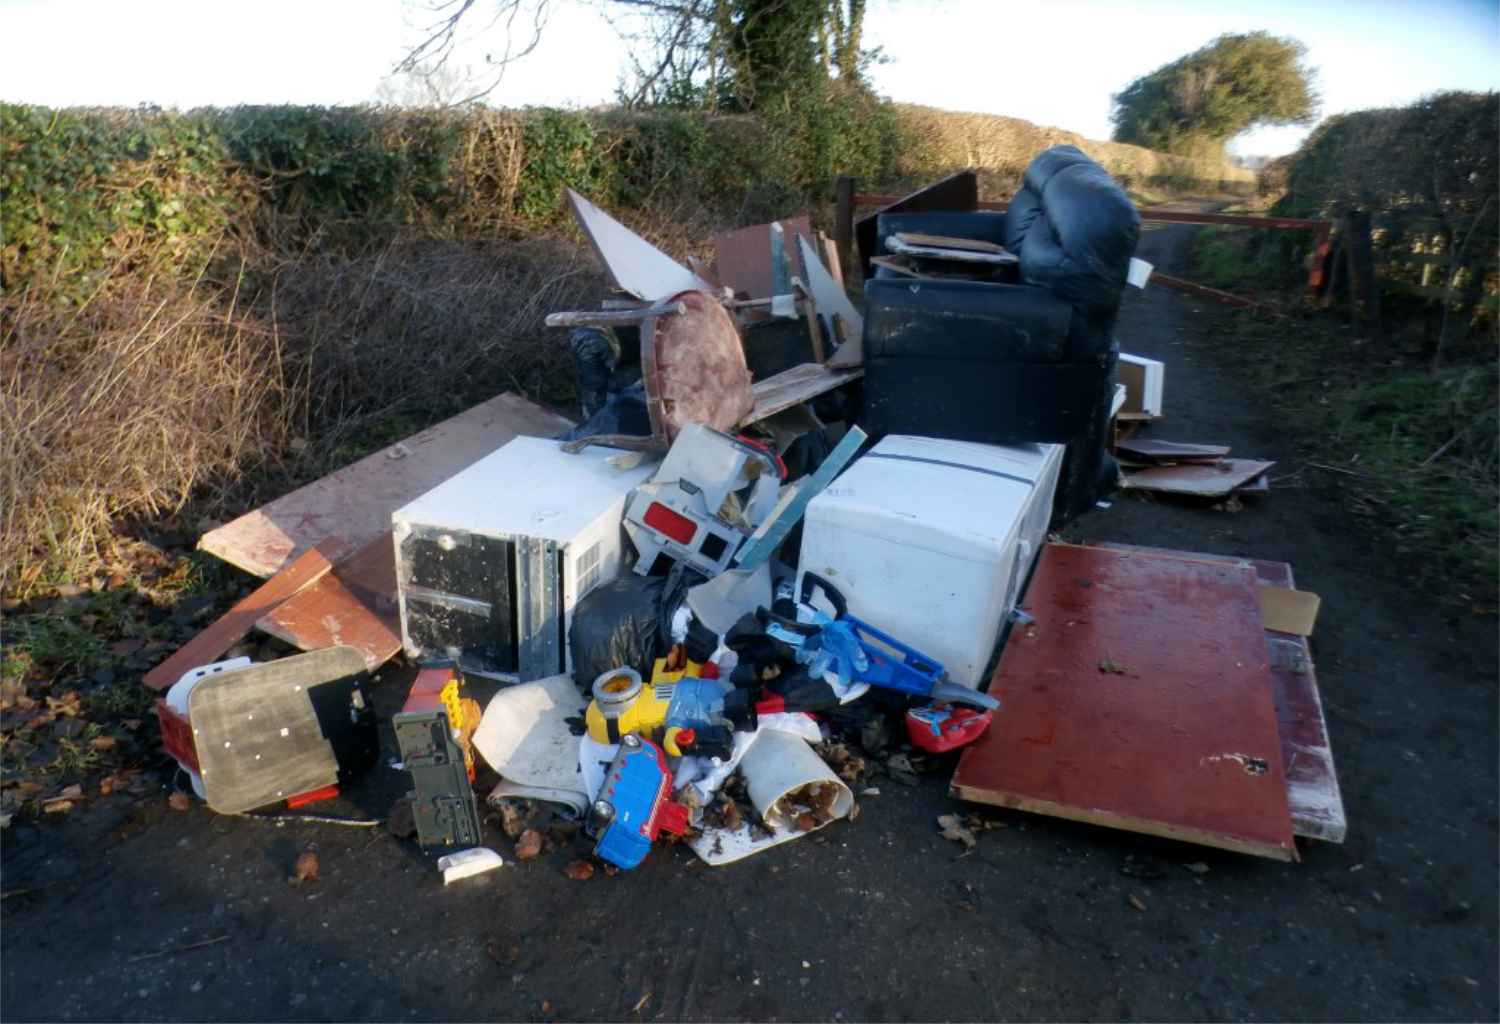 Evidence of fly-tipping in the prosecution of Jimmy Nicholson, 32, of Lyneburn Cottage caravan site, Northumberland